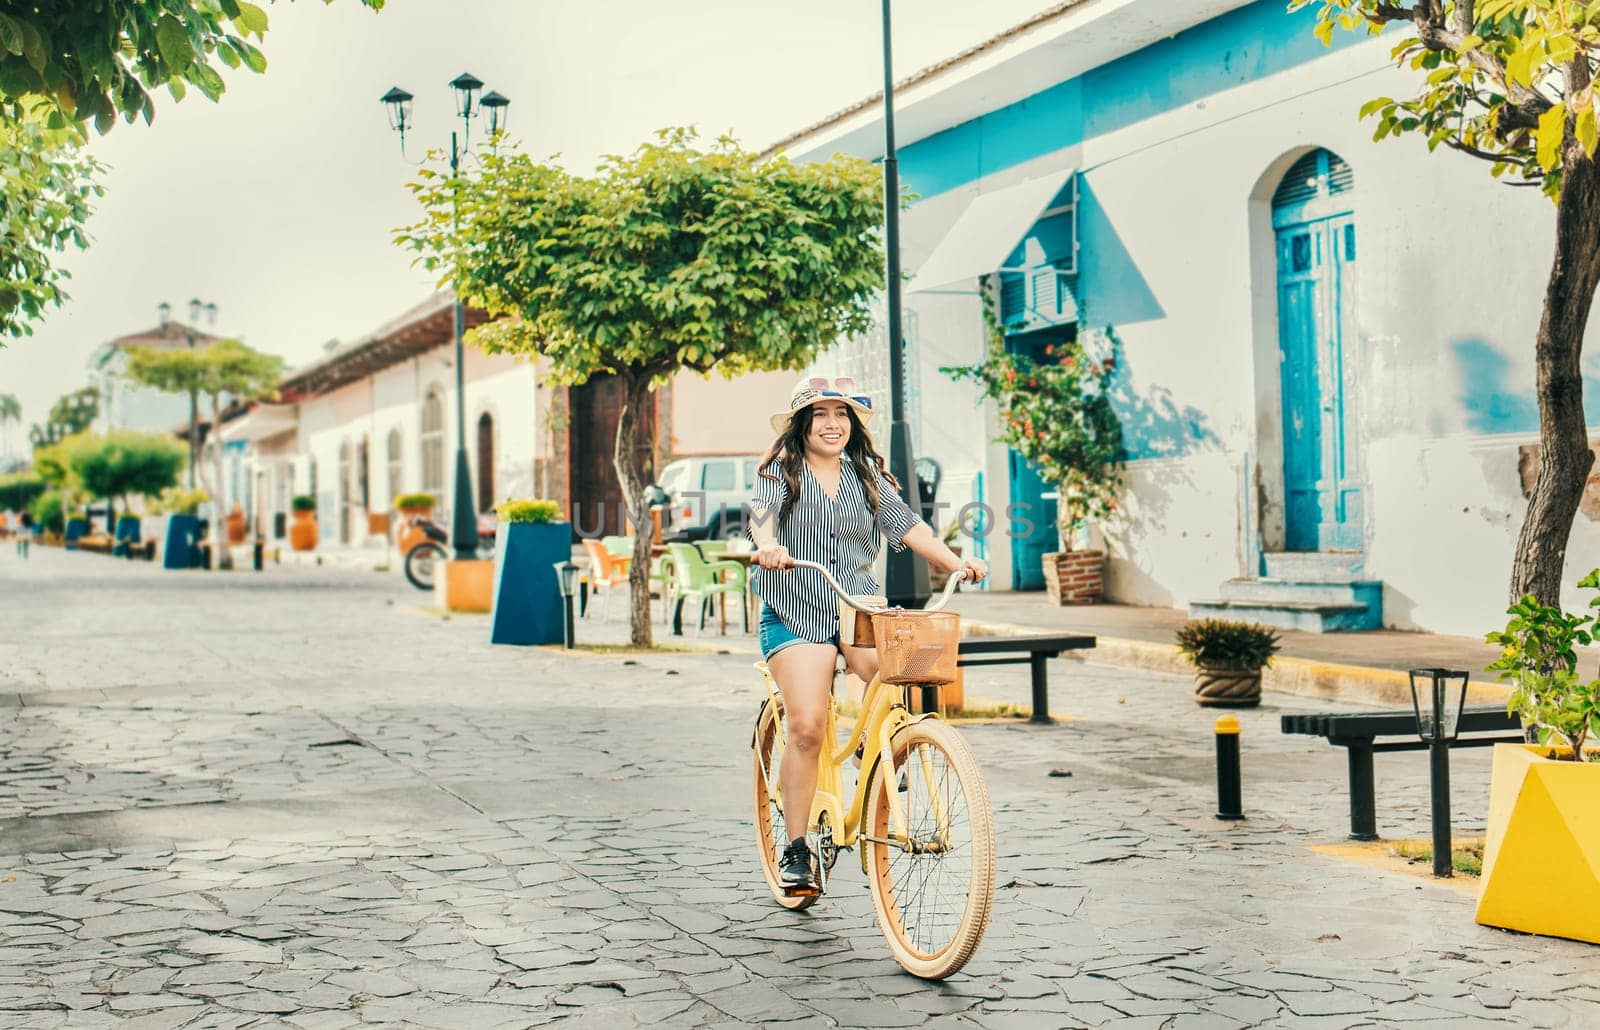 Beautiful and happy girl riding a bicycle on the street of La Calzada, Granada, Nicaragua. Tourist woman riding a bicycle on the streets of Granada by isaiphoto